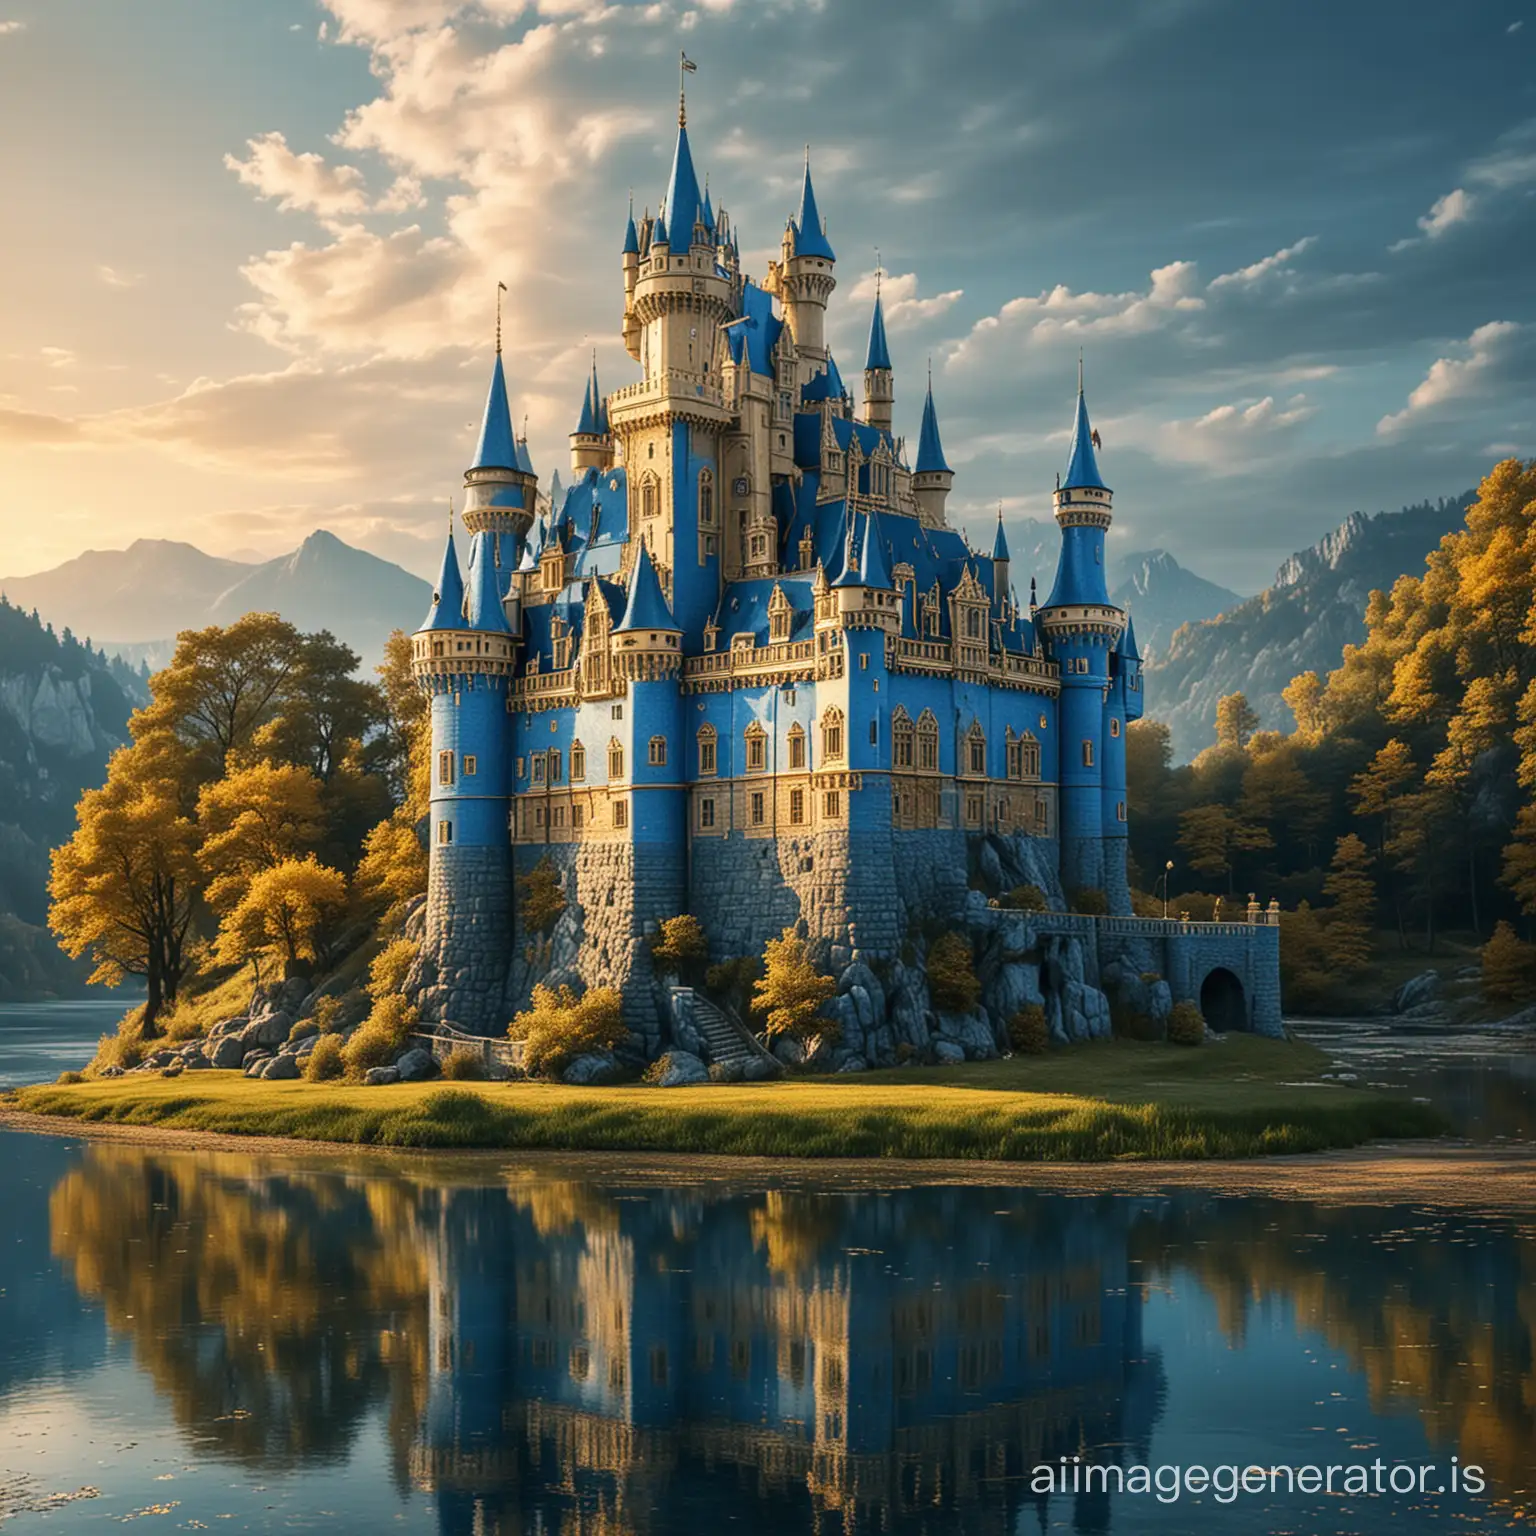 Very beautiful and blue and golden castle